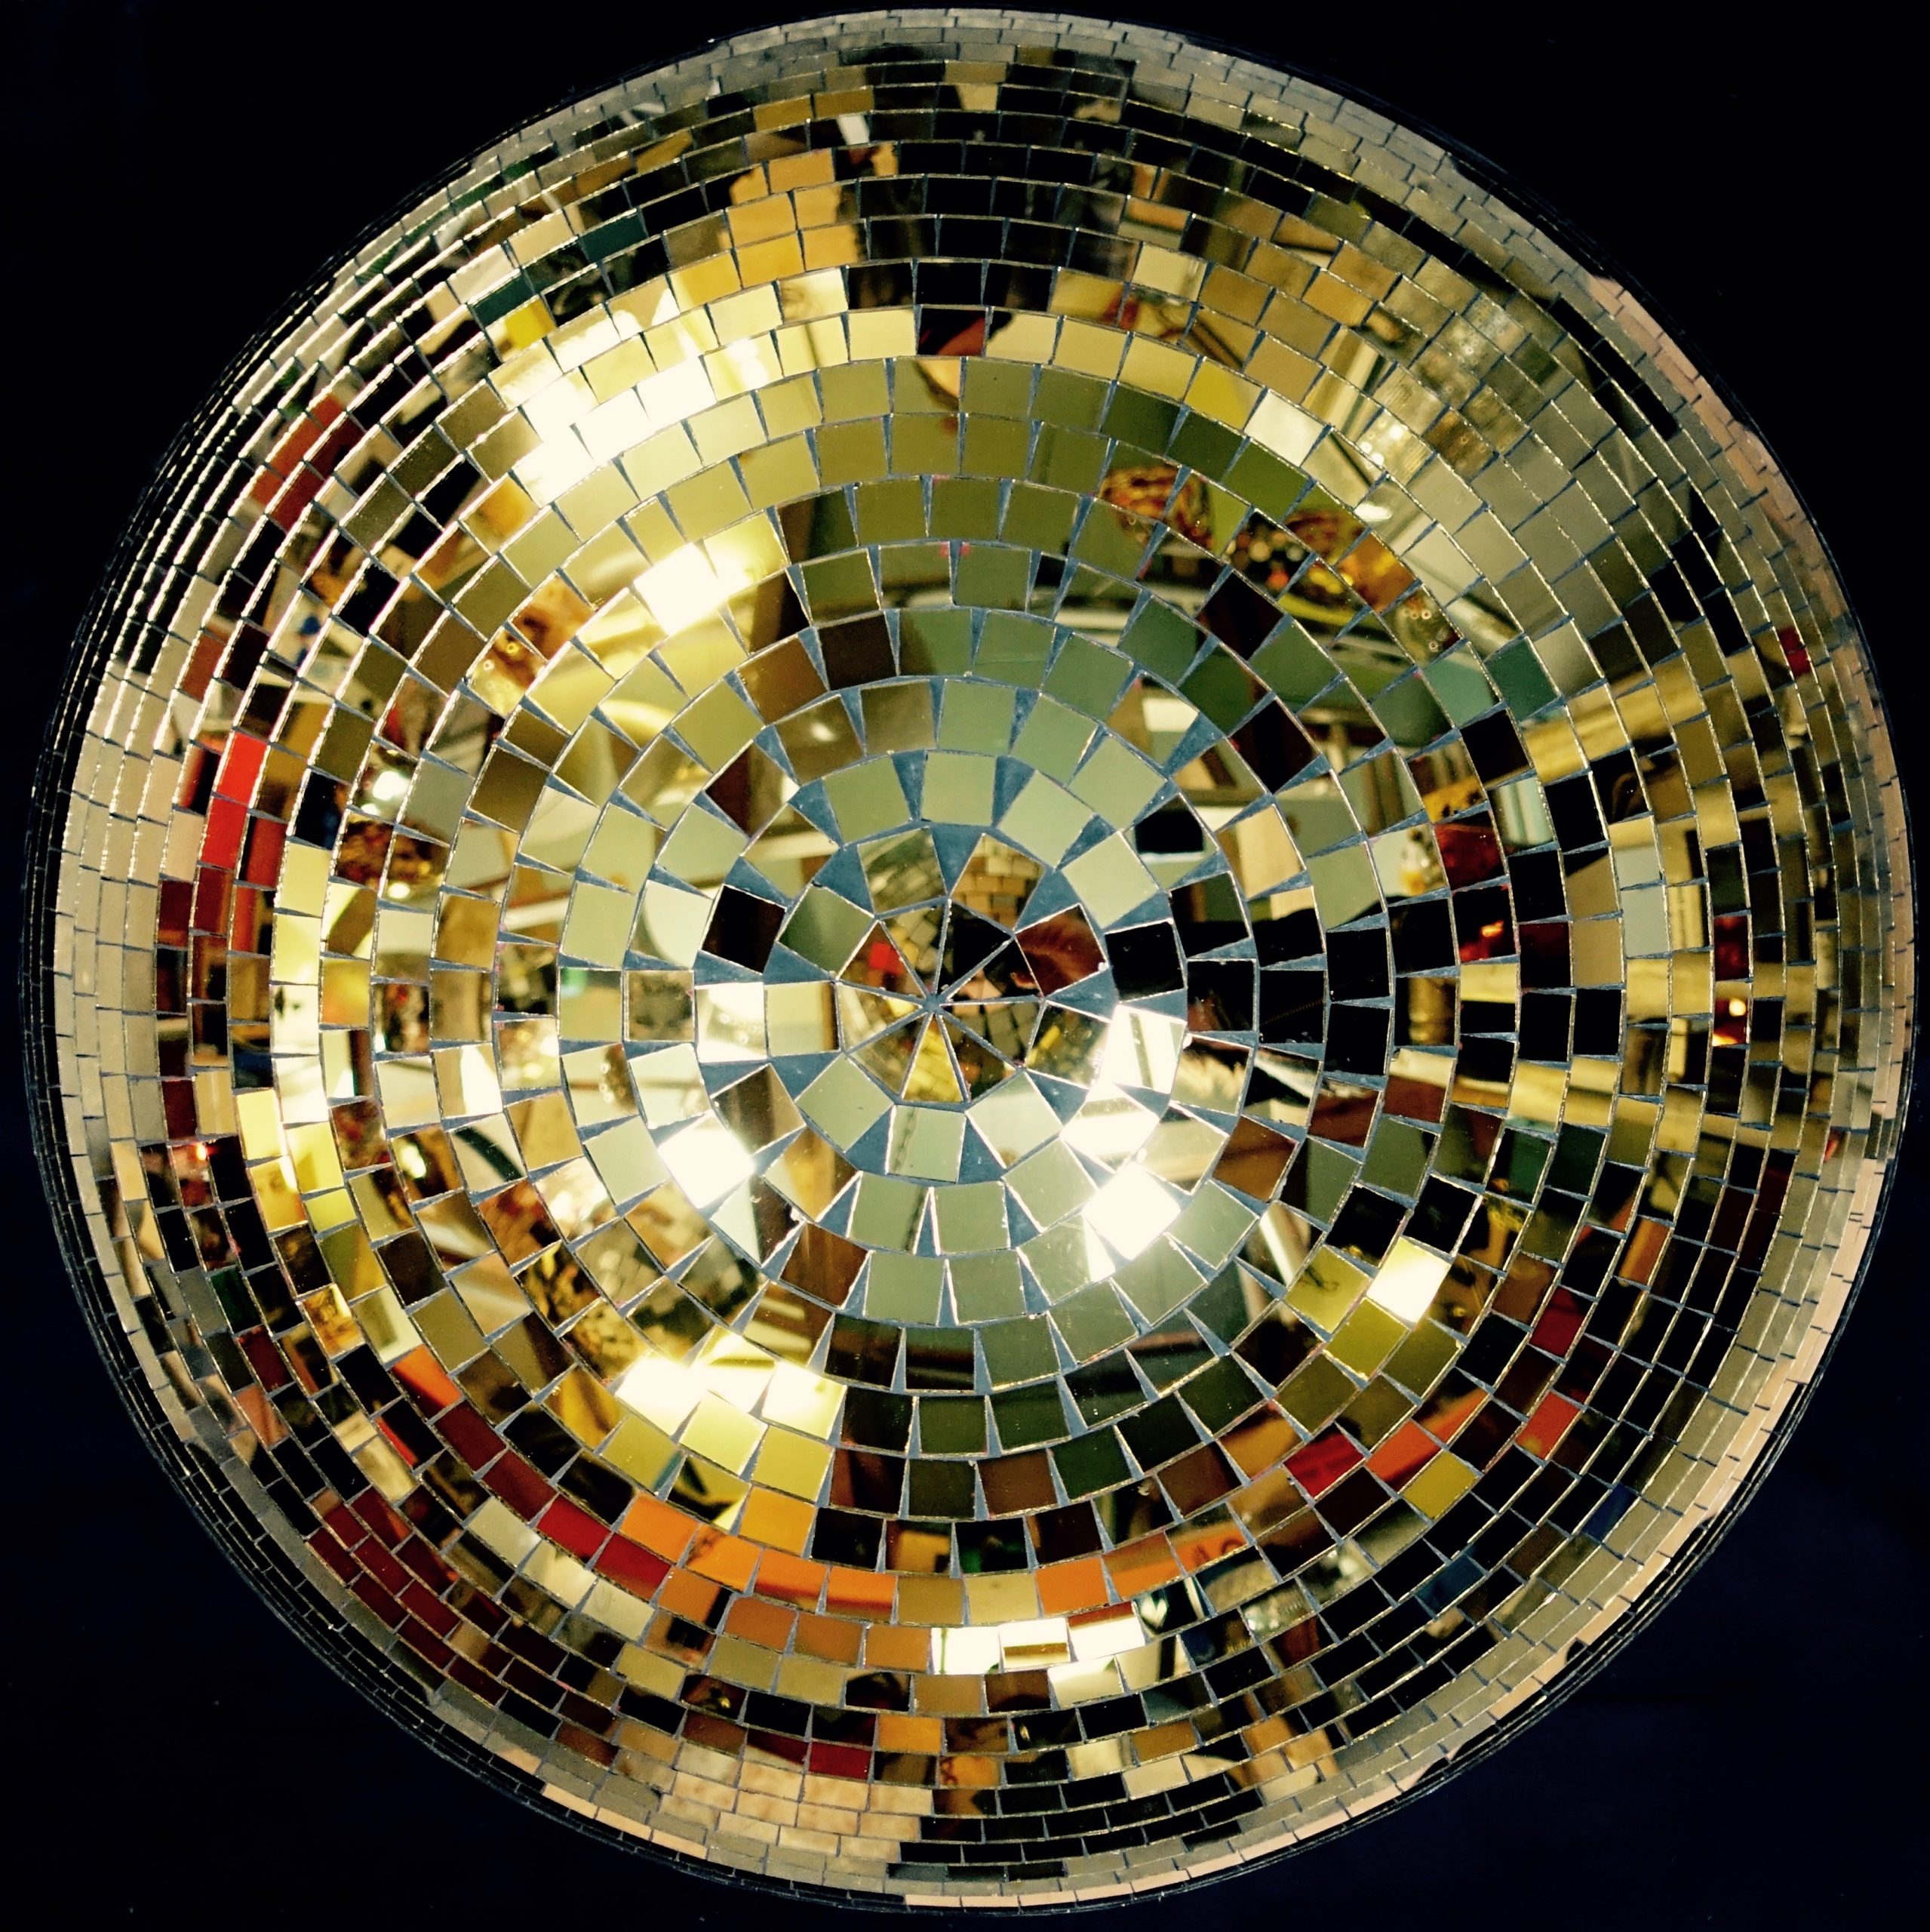 1m gold mirror ball approx weight 35kg dry hire fee - £225 purchase price - POA